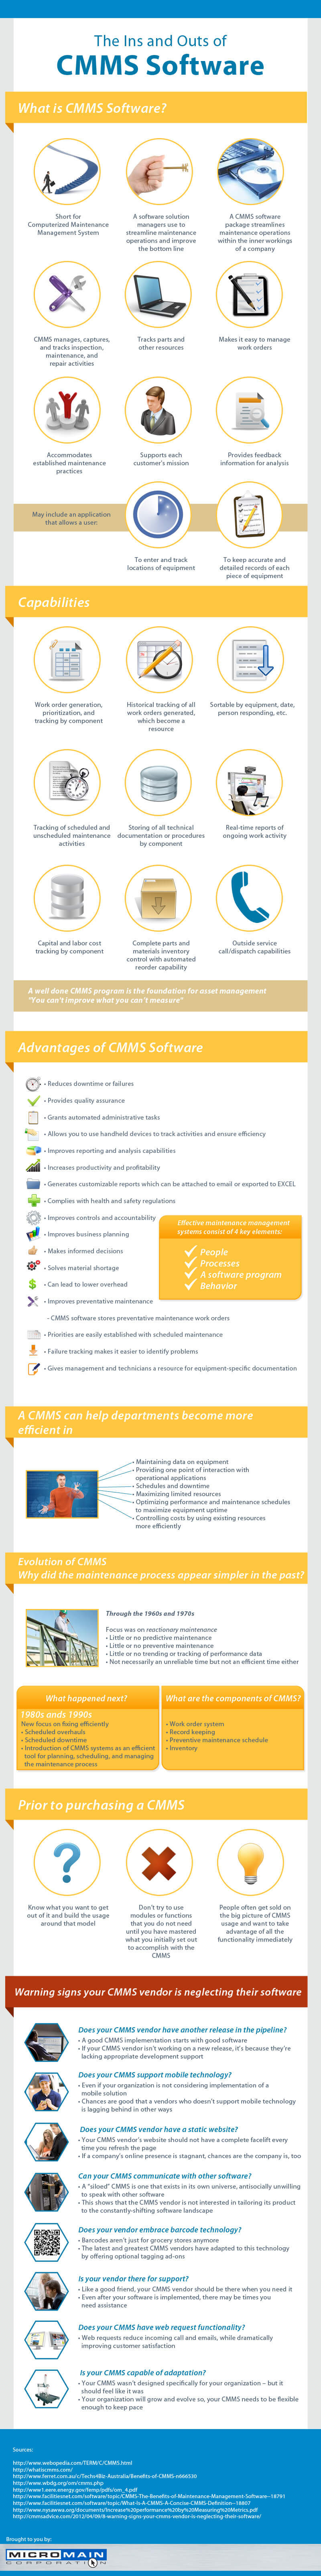 CMMS Software Infographic